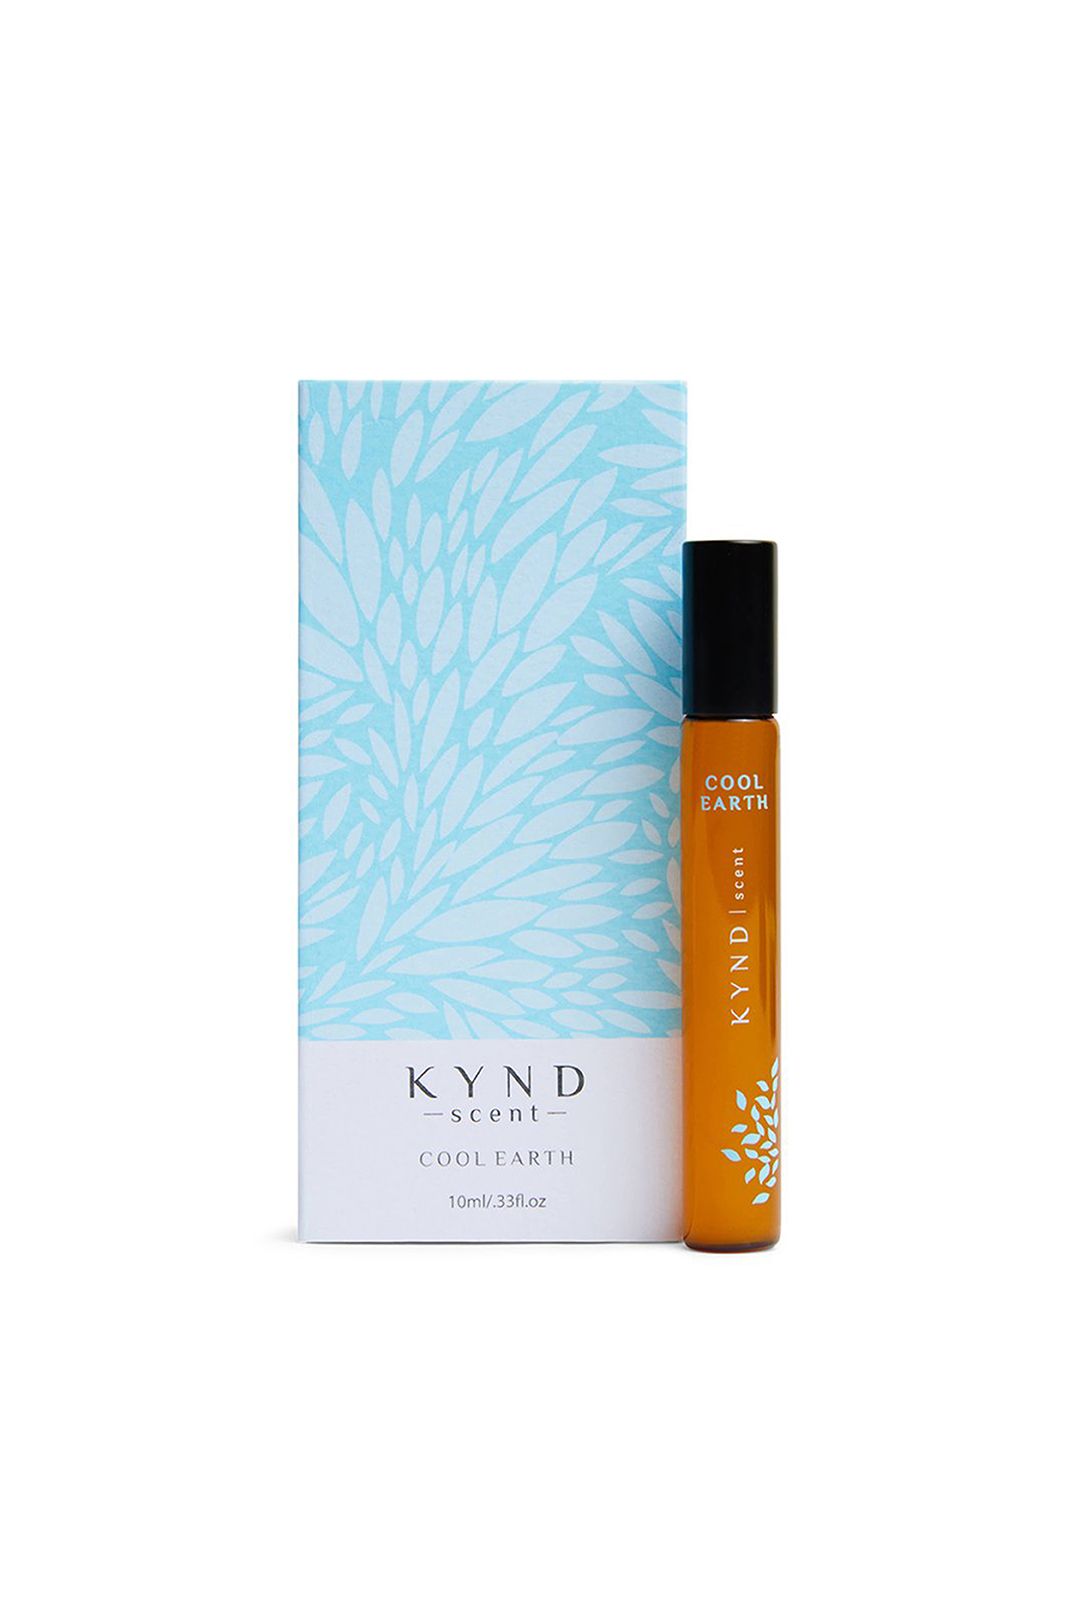 kynd-scent-cool-earth-product-1